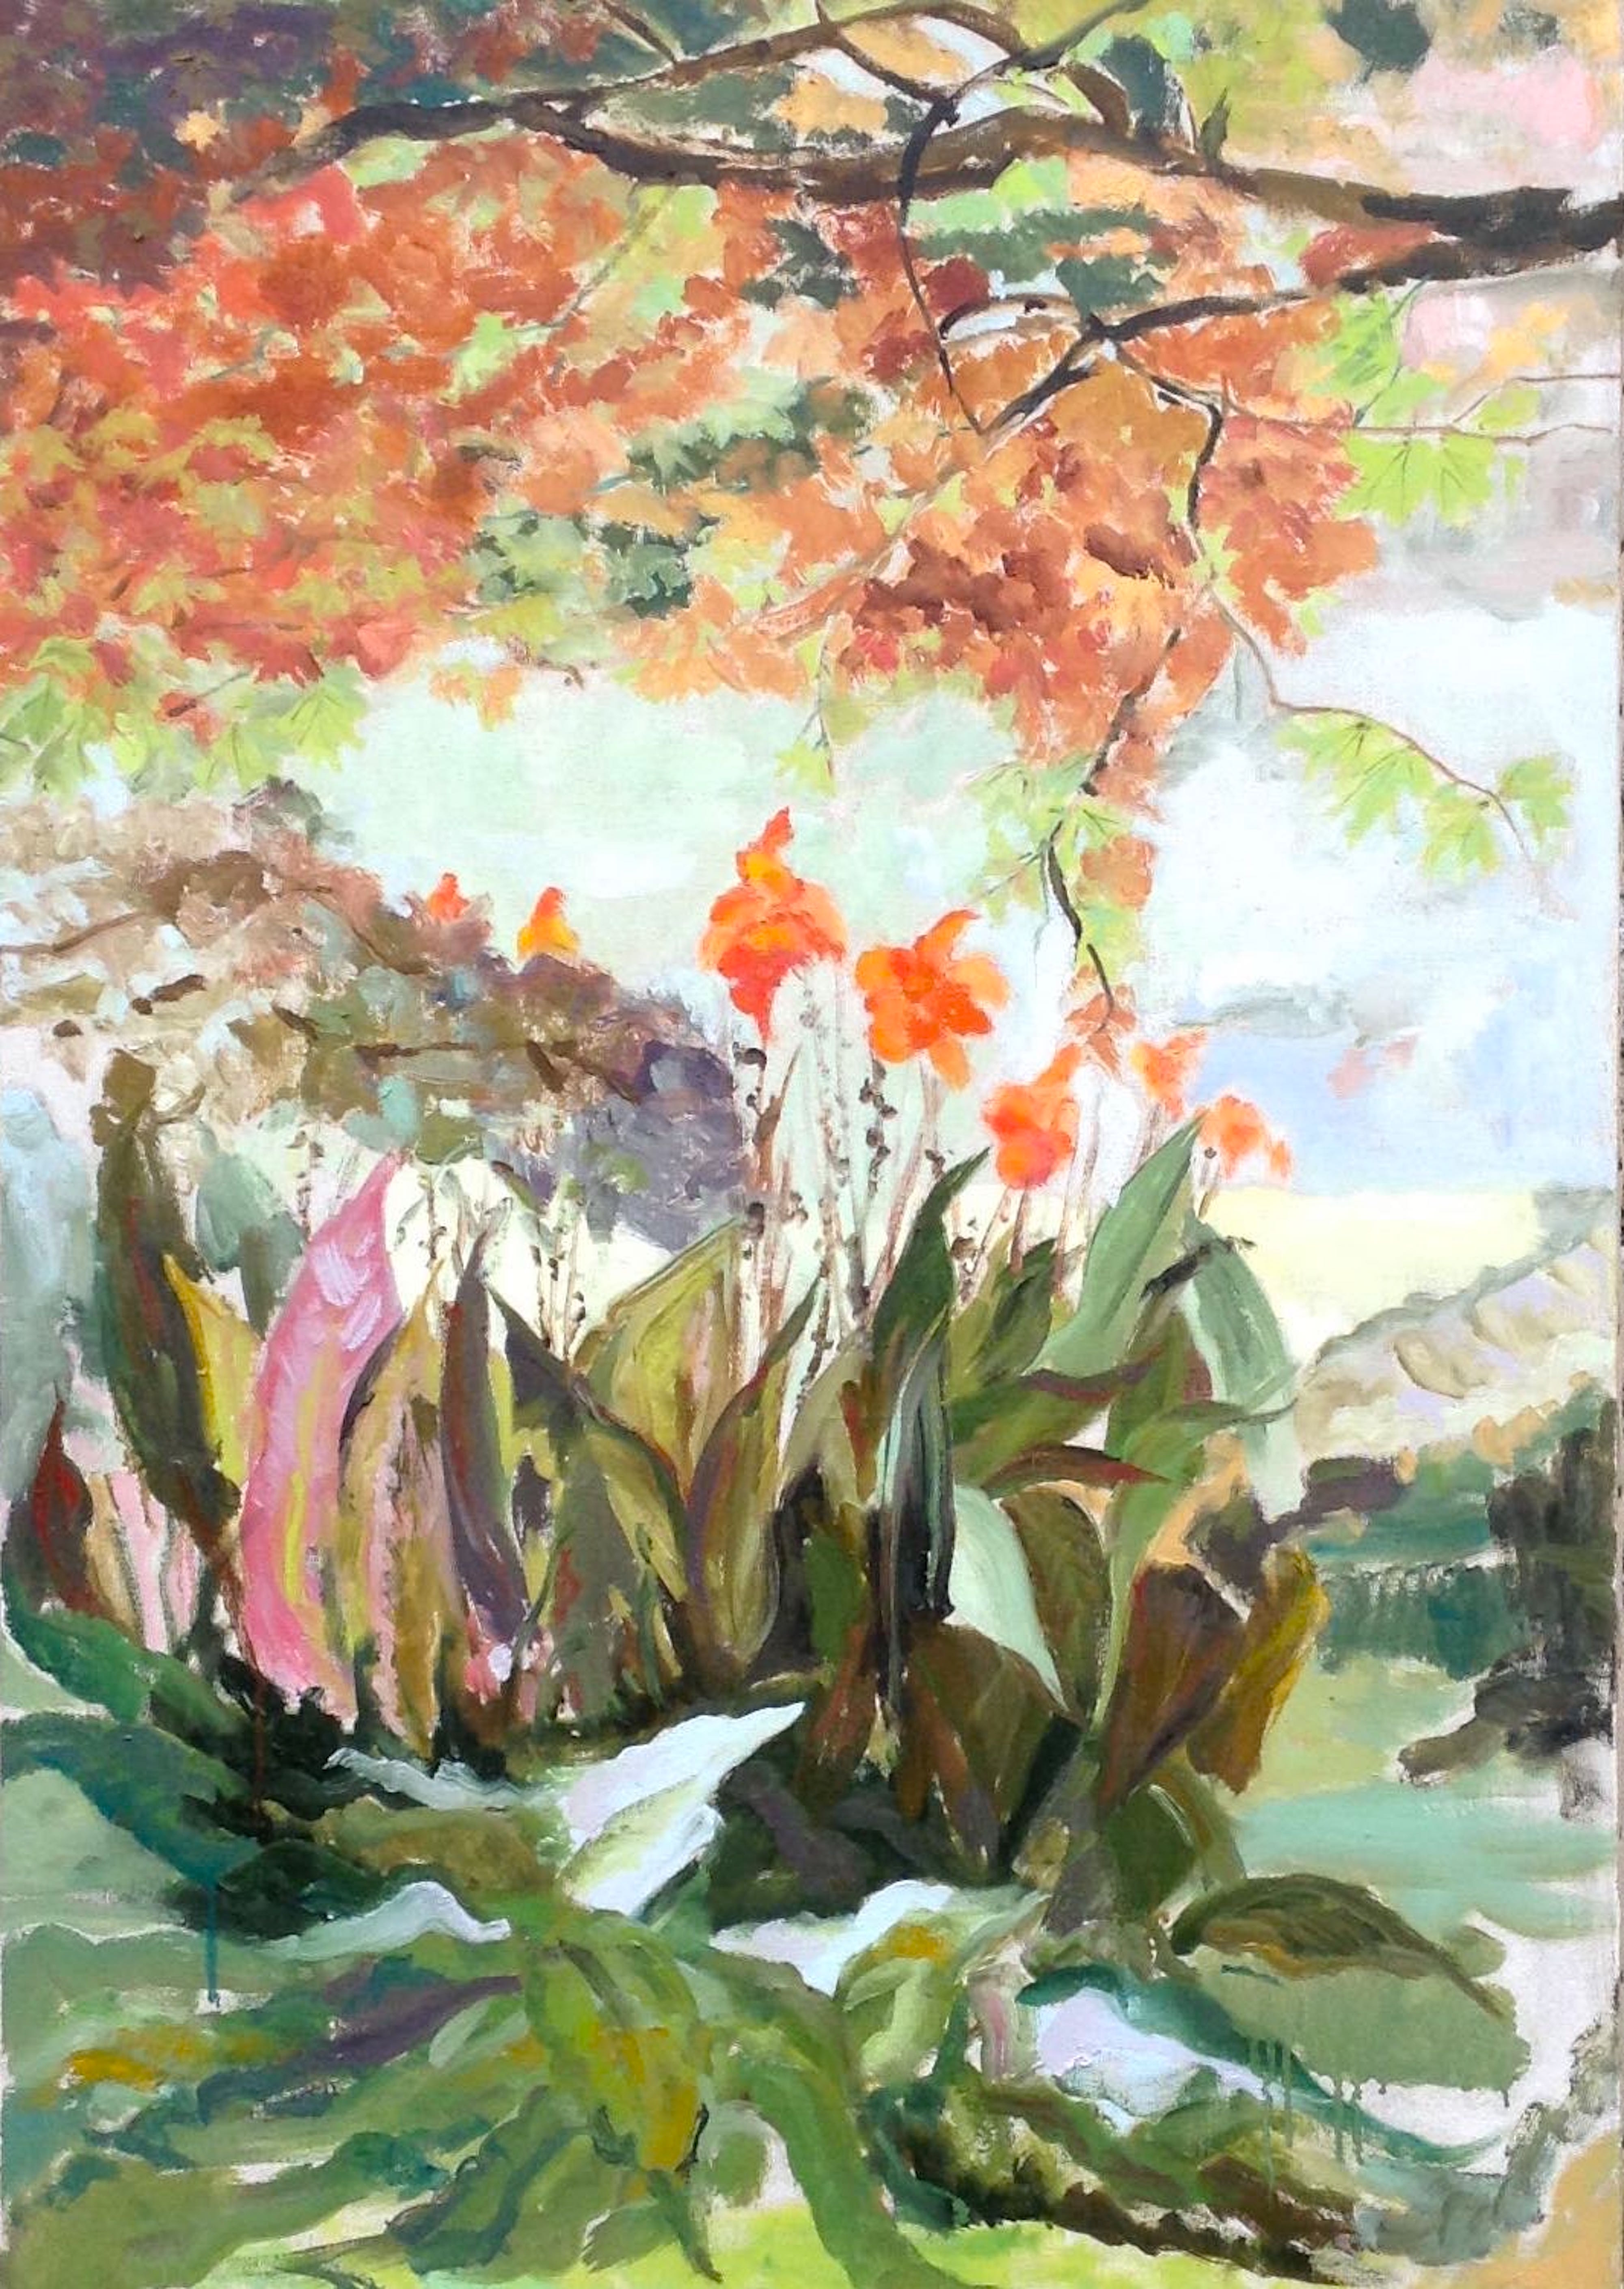 Image of - Canna Lilies in Autumn